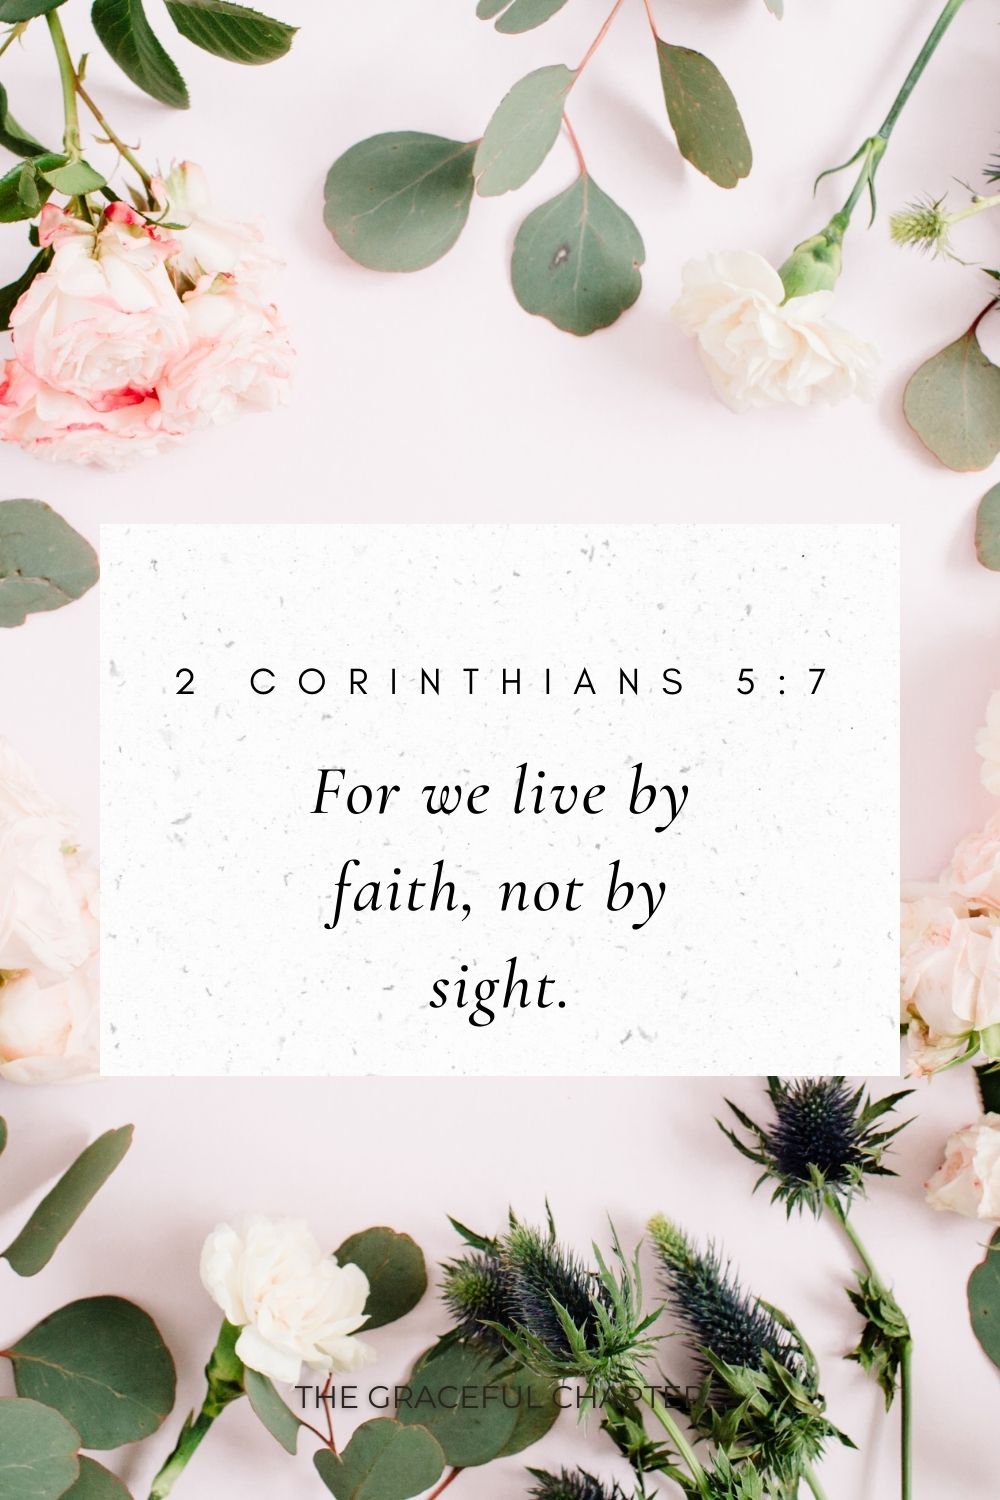 For we live by faith, not by sight. 2 Corinthians 5:7